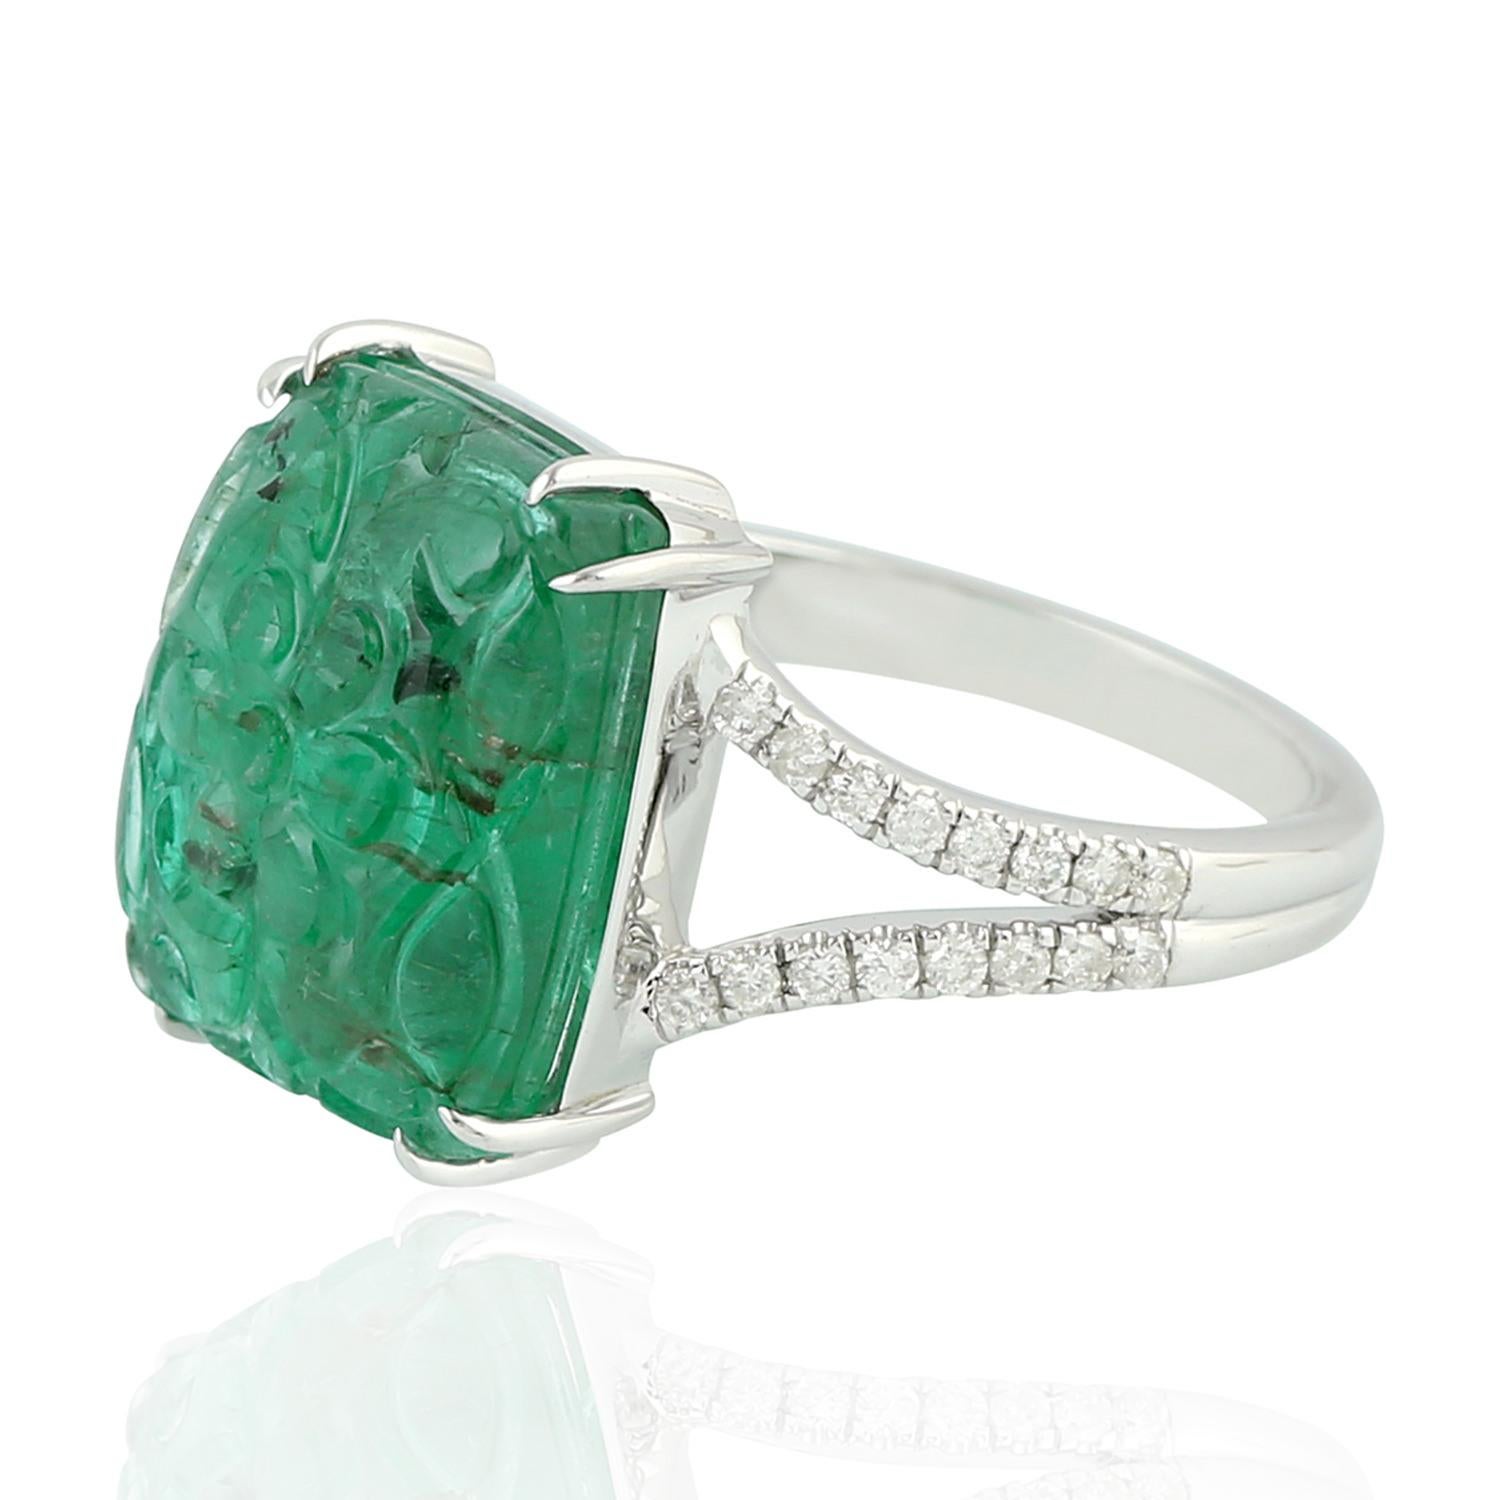 This ring has been meticulously crafted from 18-karat gold. It is hand set in 8.16 carats carved emerald & .24 carats of diamonds. 

The ring is a size 7 and may be resized to larger or smaller upon request. 
FOLLOW  MEGHNA JEWELS storefront to view